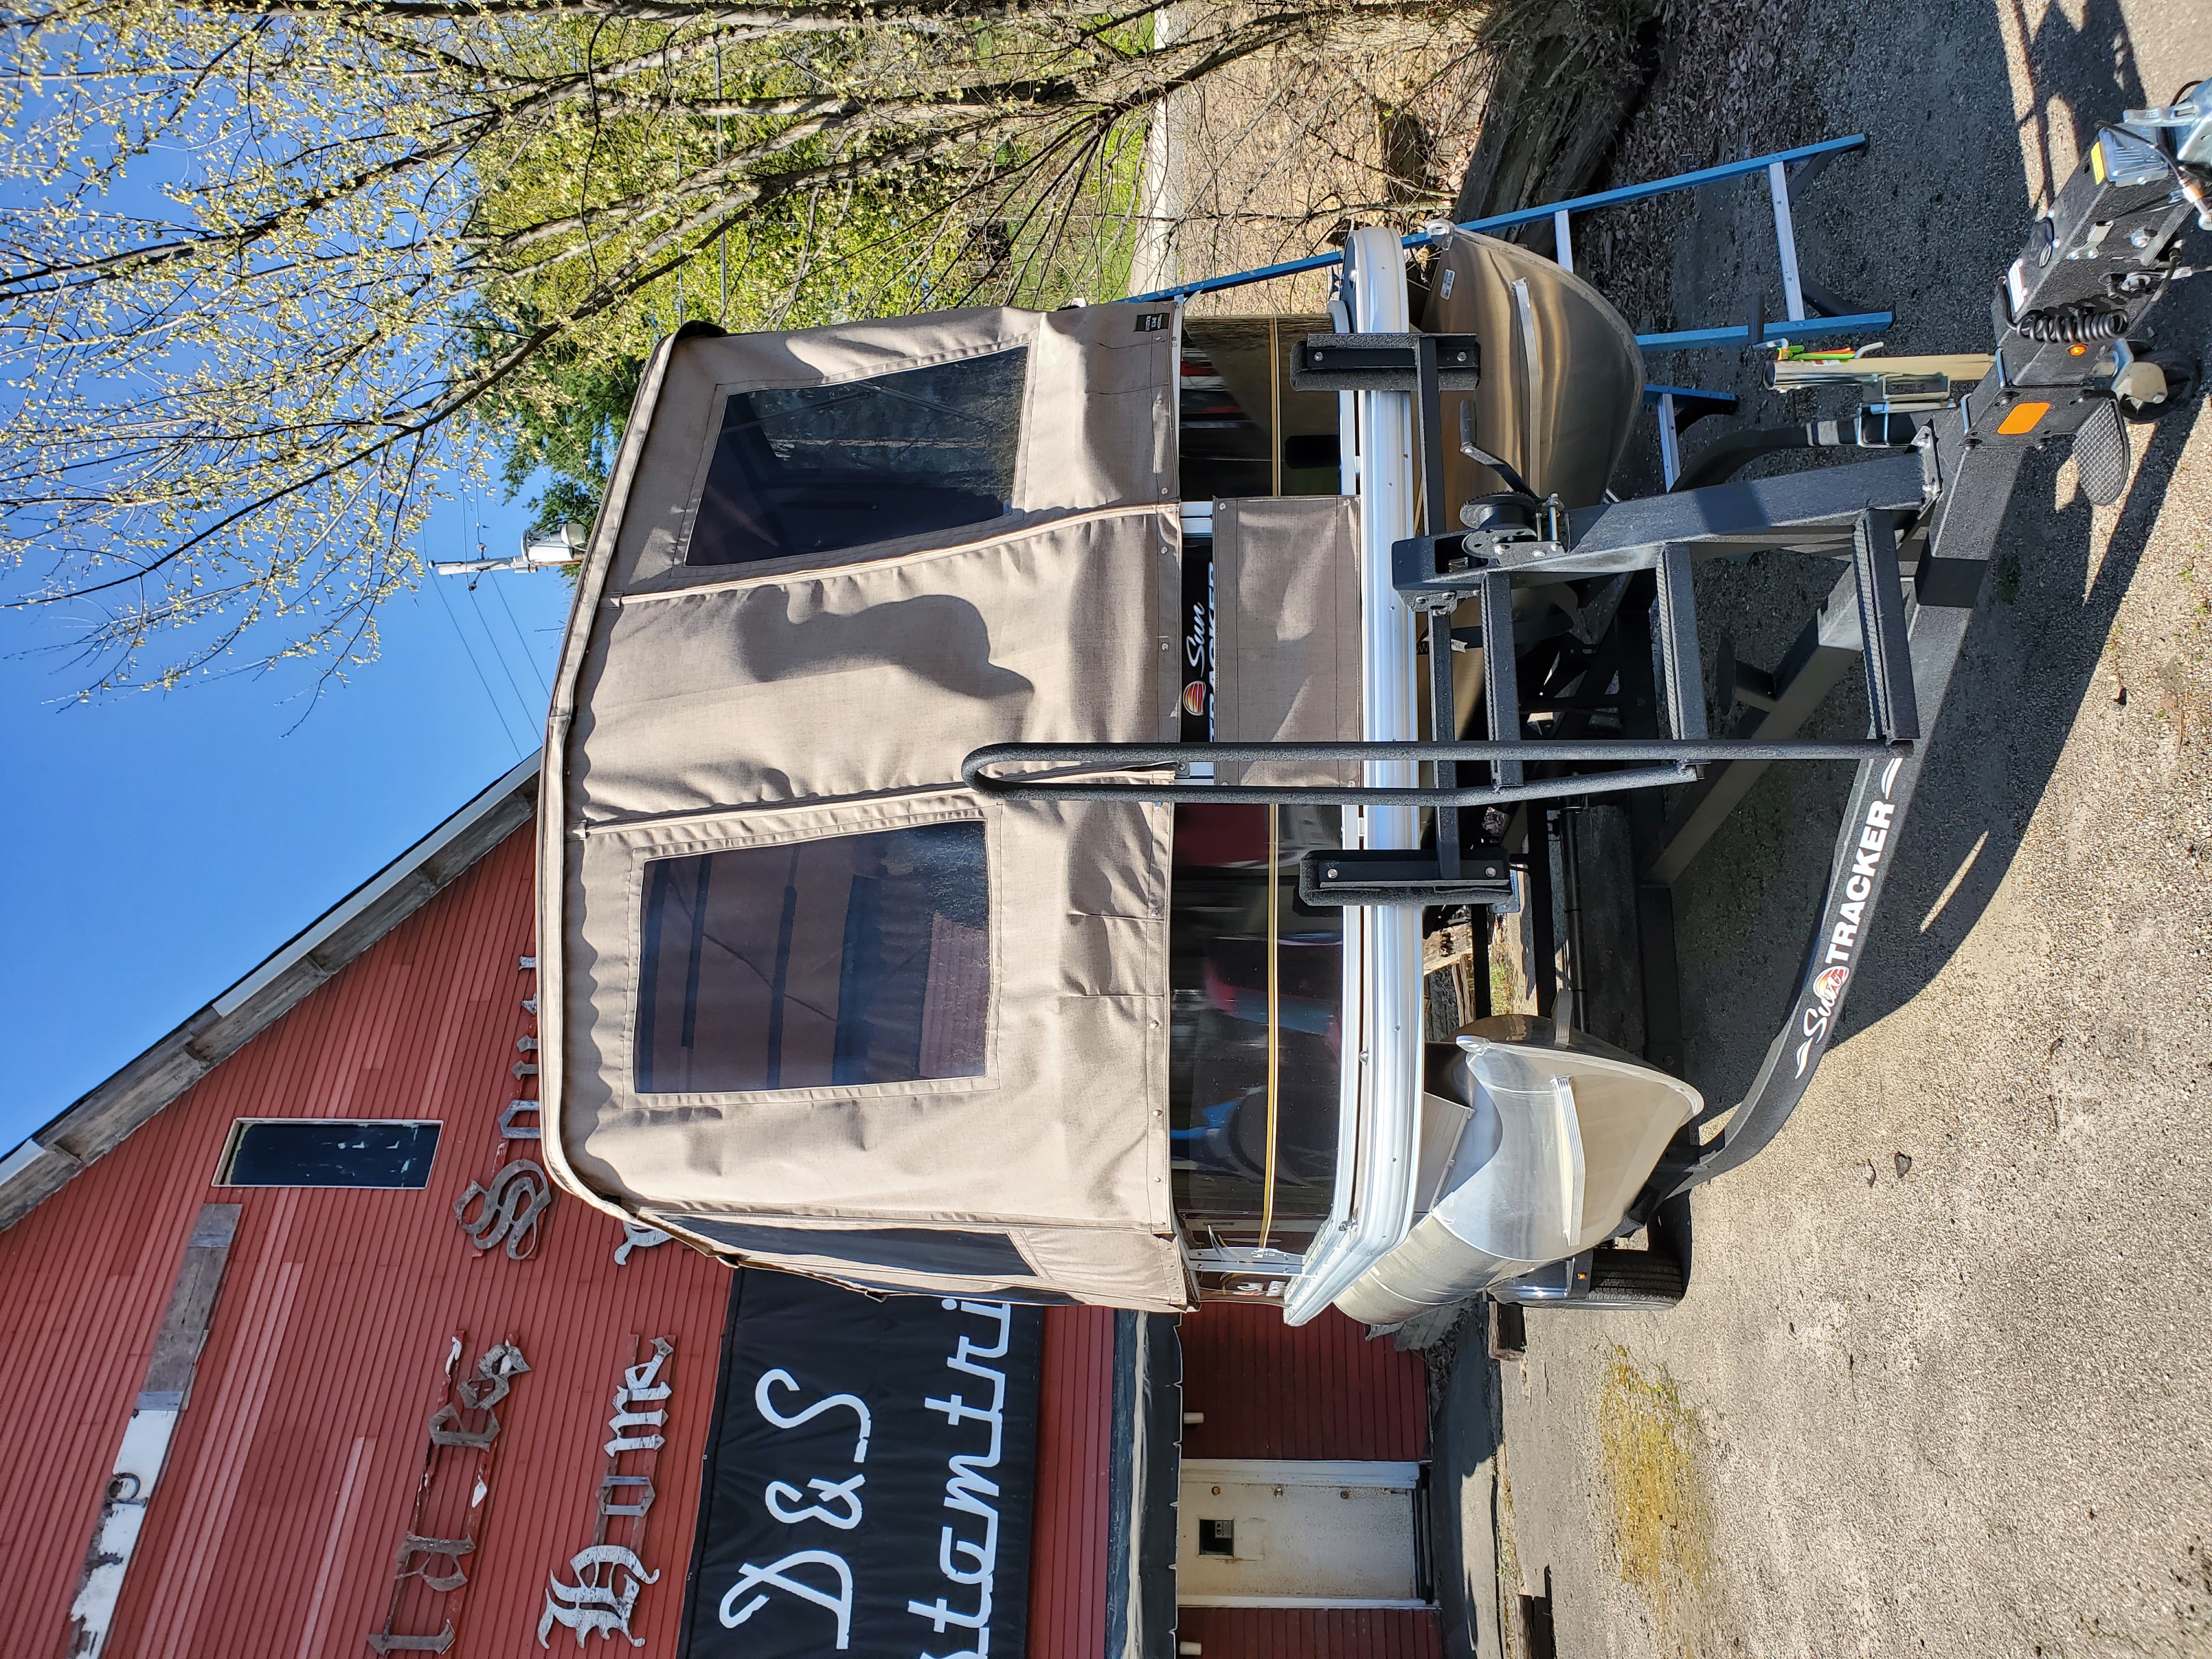 2021 18 foot Sun Tracker Bass Buggy DLX Pontoon Boat for sale in Penn Hills, PA - image 4 